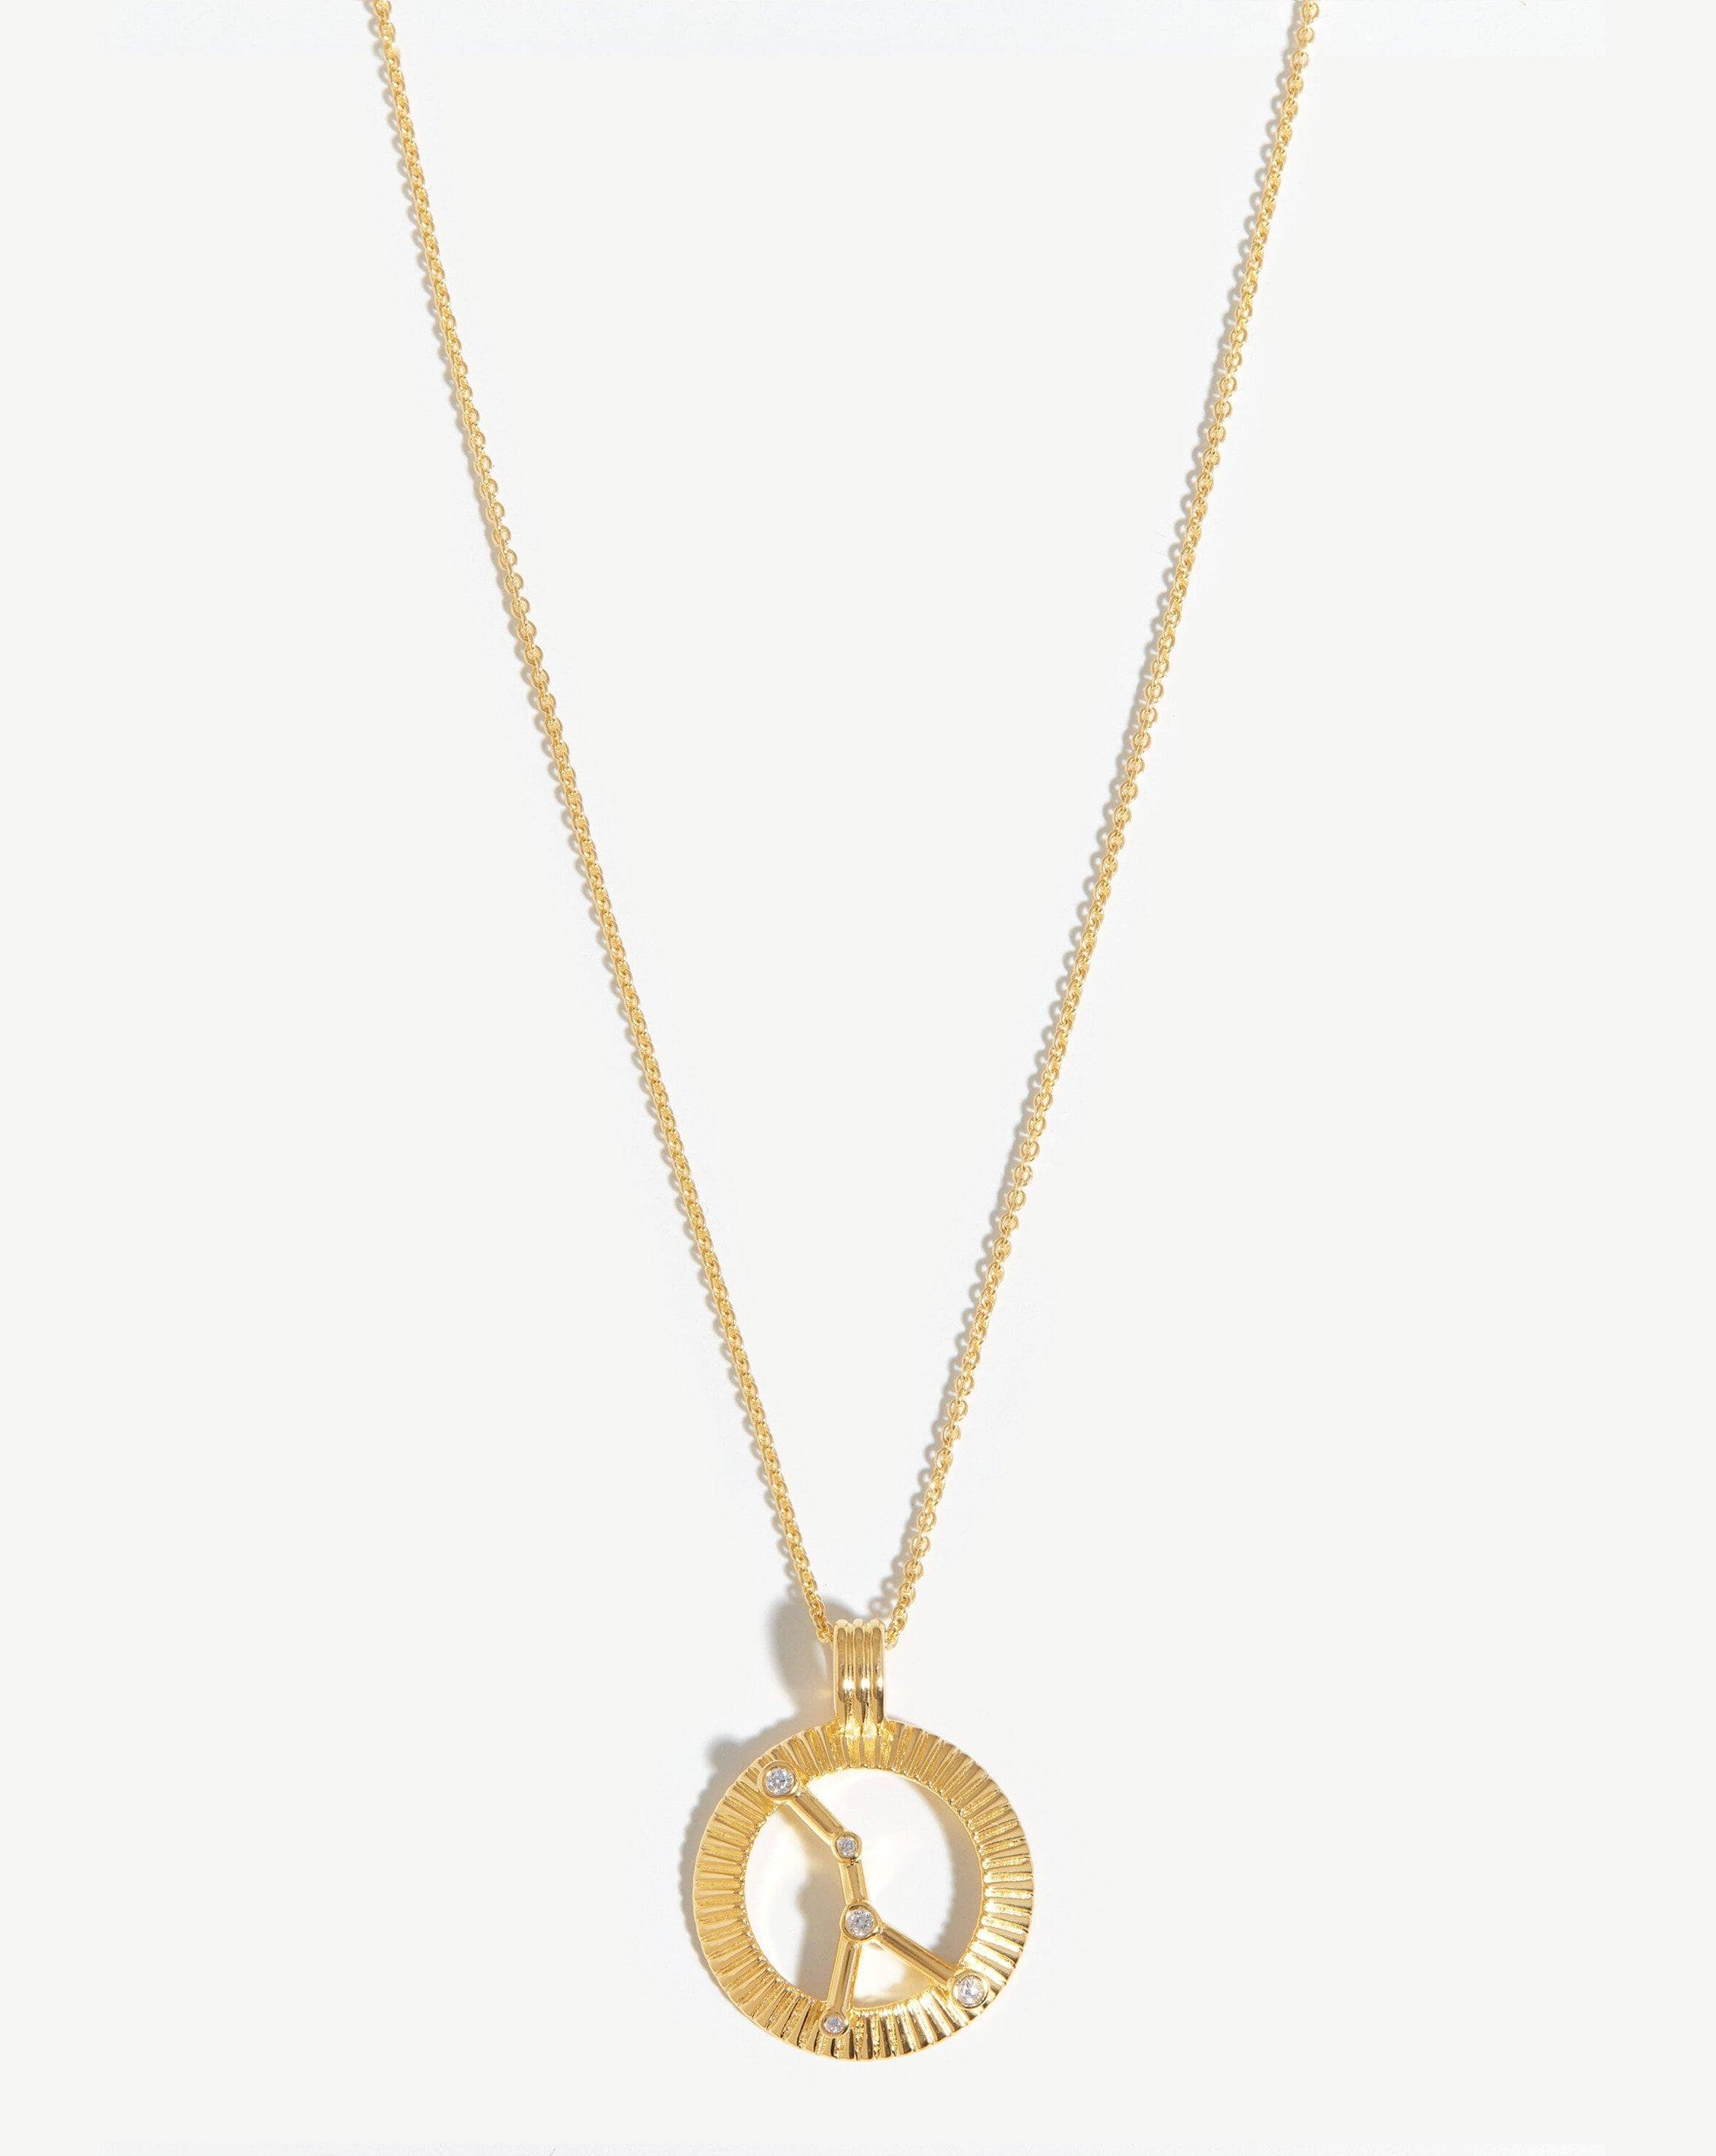 Zodiac Constellation Pendant Necklace - Cancer | 18ct Gold Plated Vermeil/Cancer Necklaces Missoma 